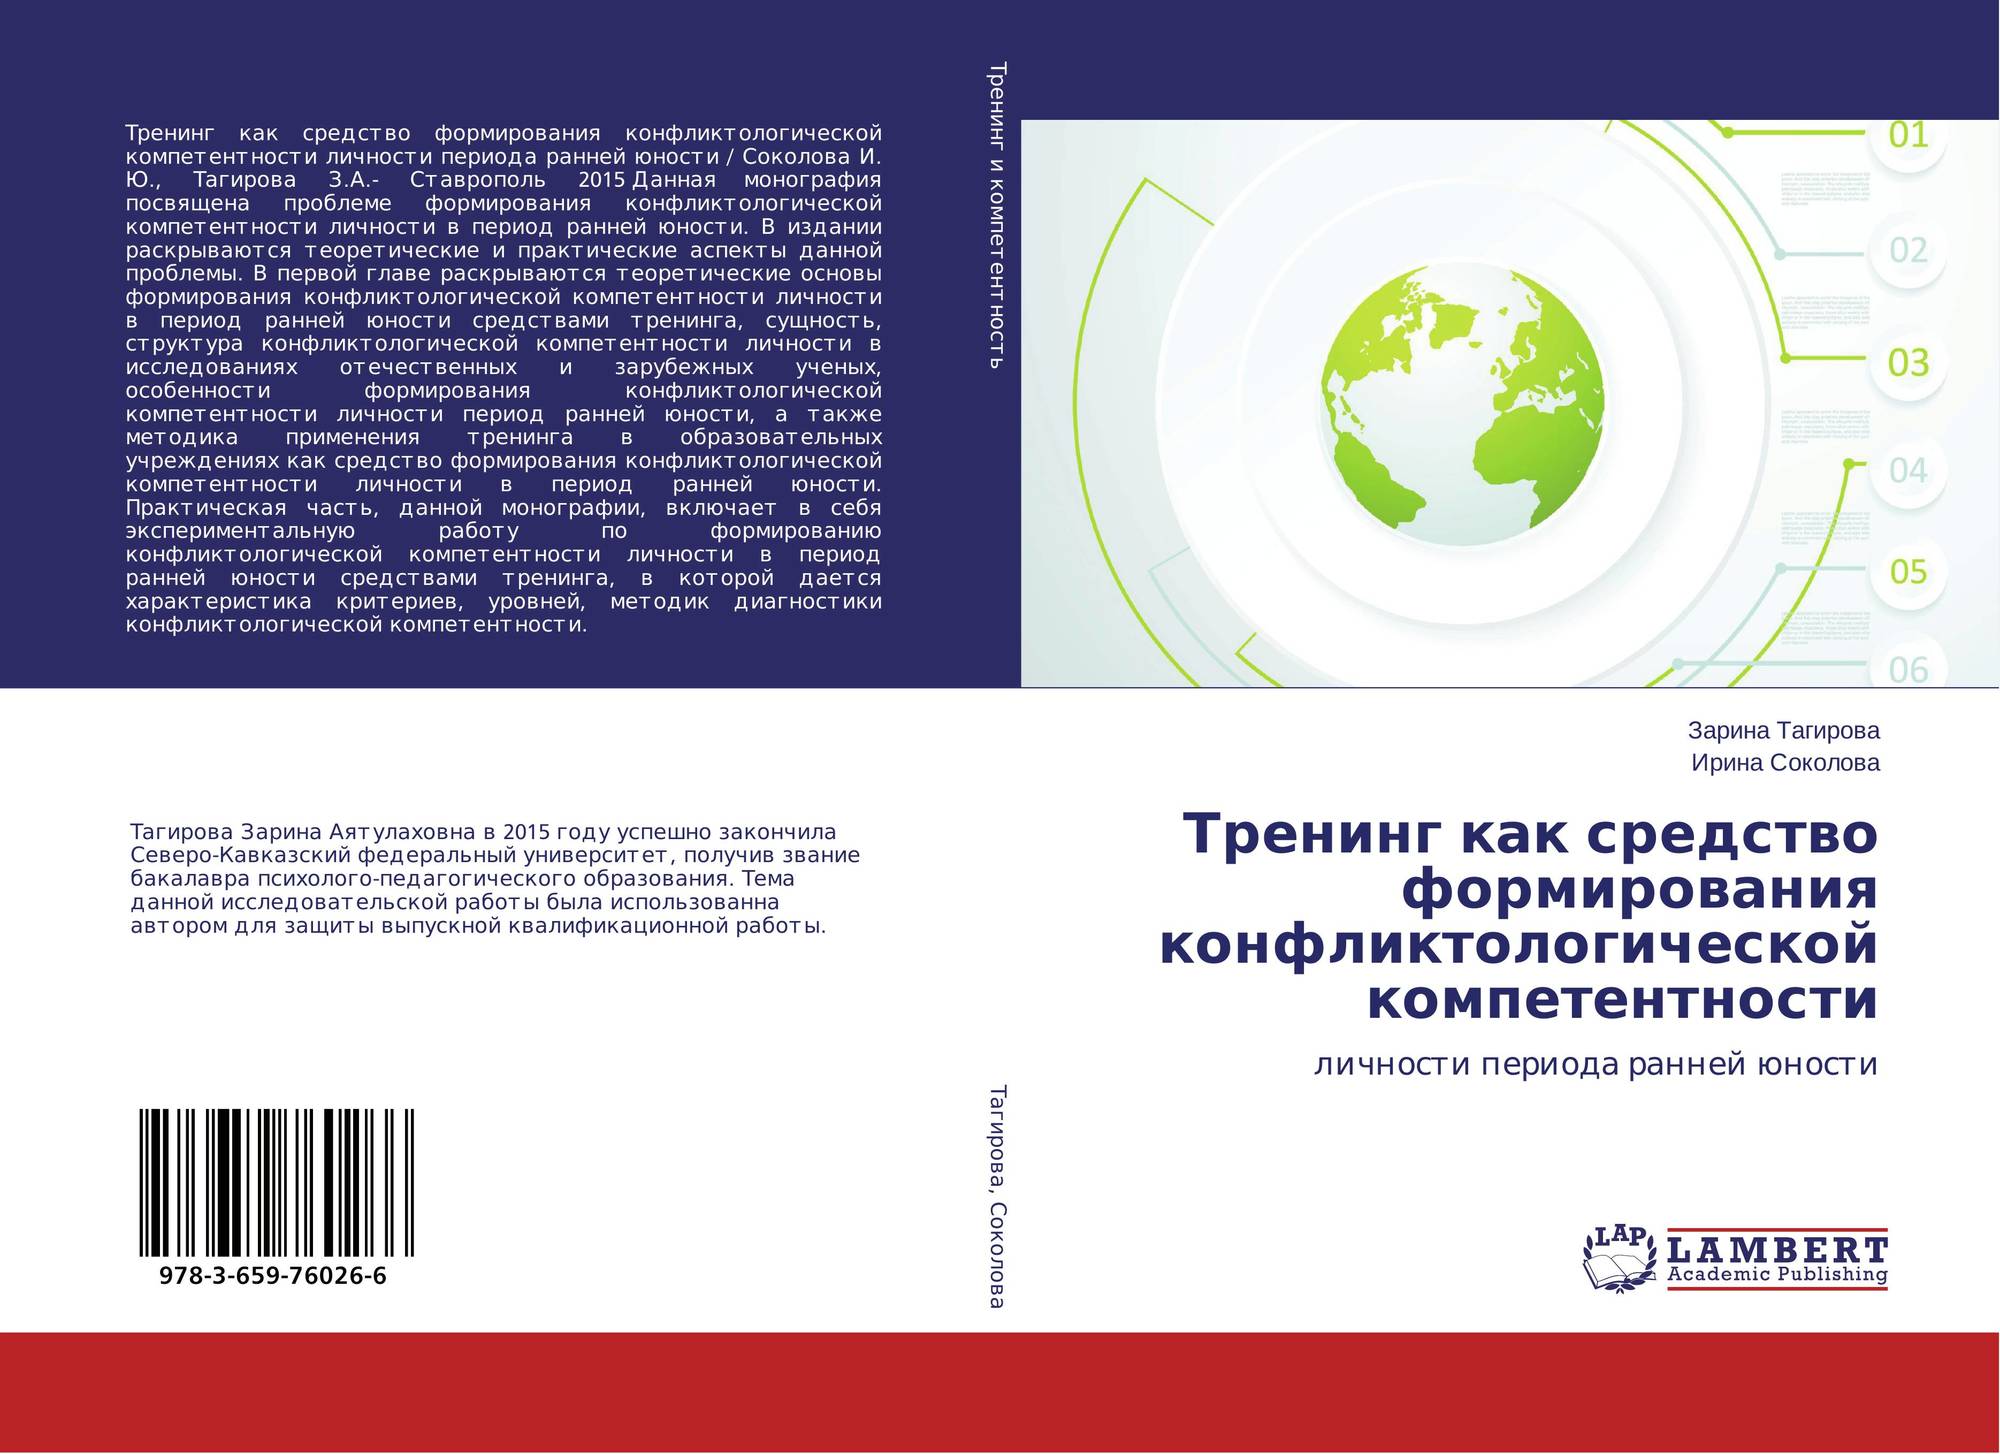 download information technology it equipment and services in greece a strategic reference 2007 2007